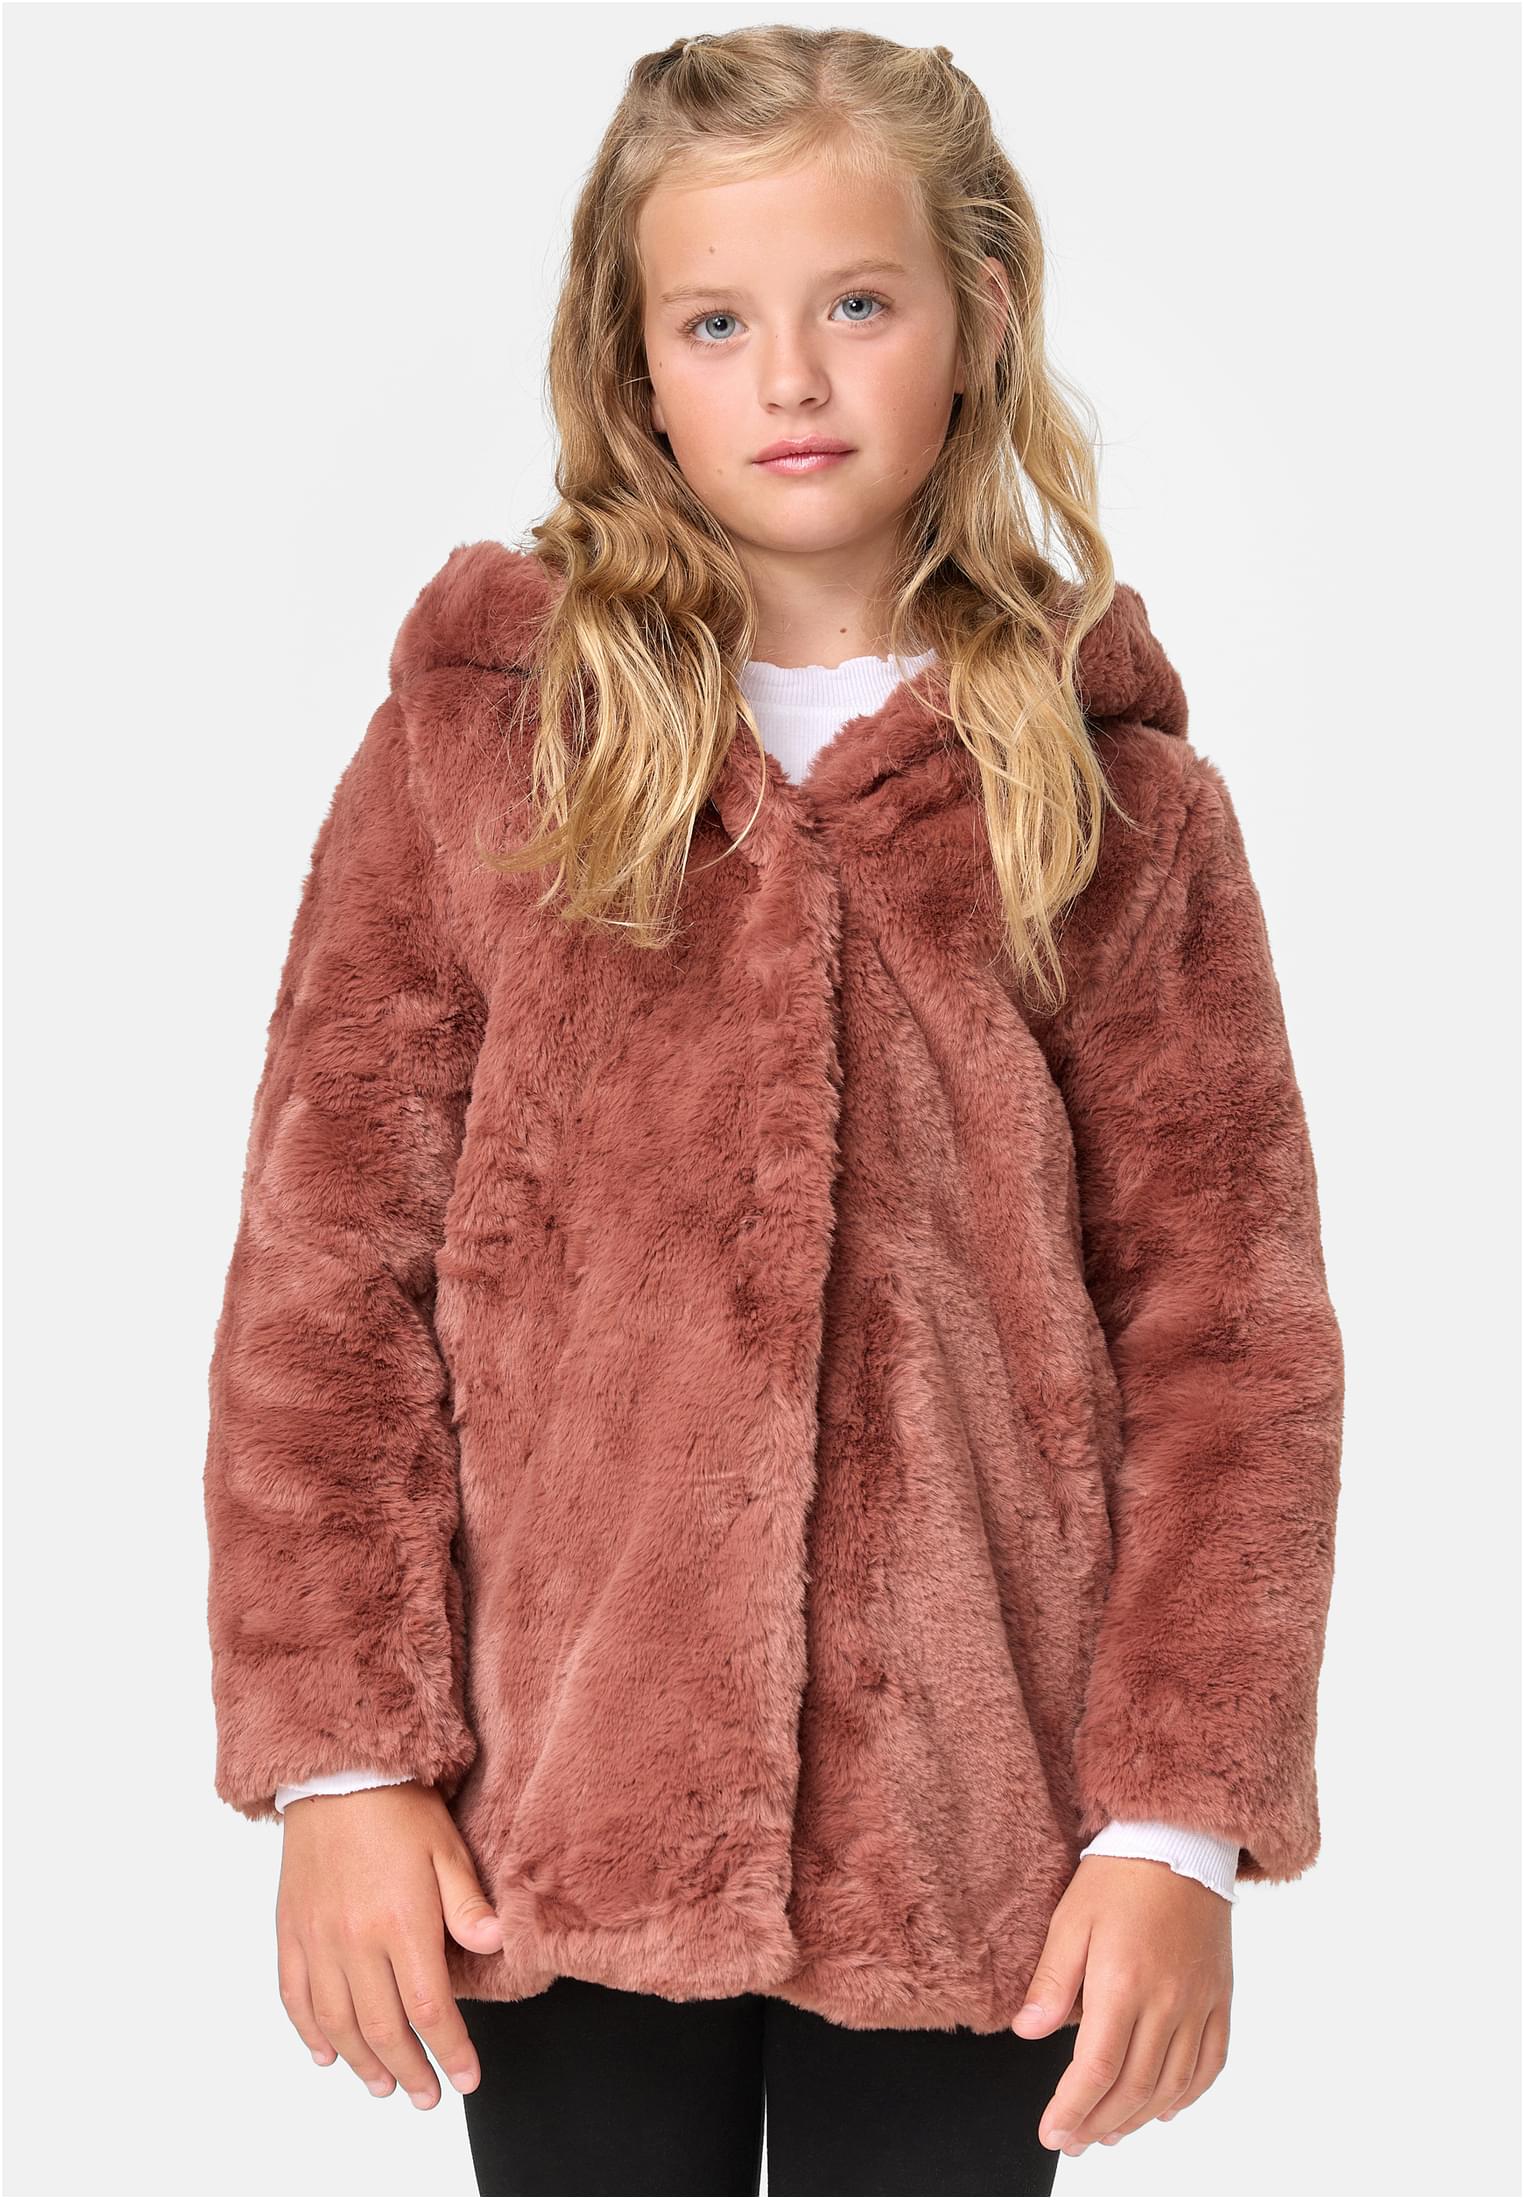 Coat Series Vol 3- The Teddy Coat For Every Cool Girl